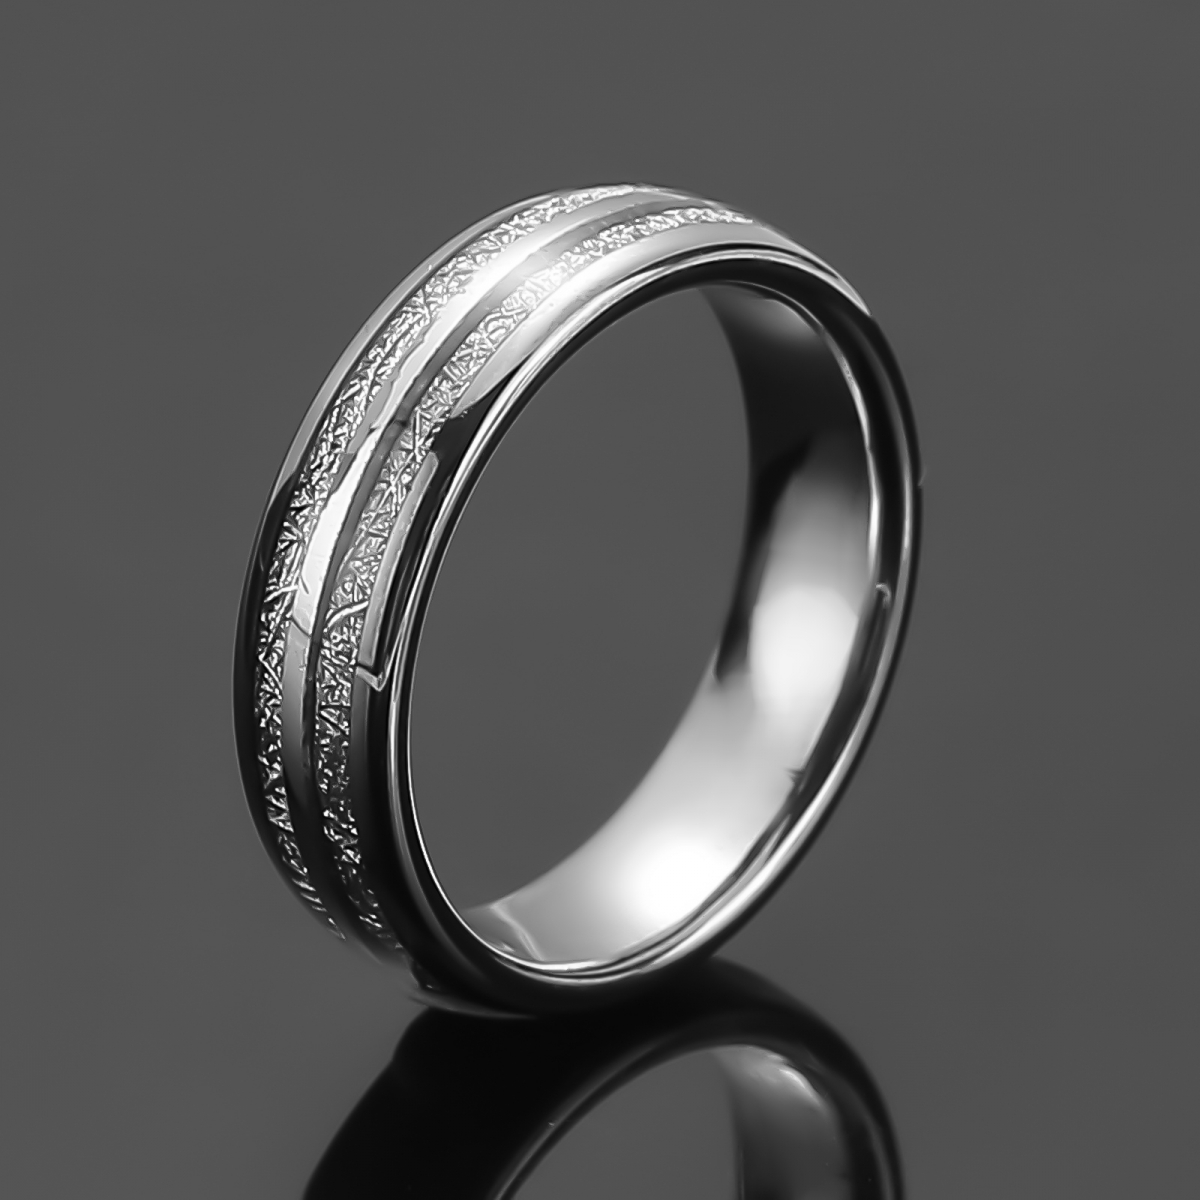 Tungsten Carbide Ring US$5.2/PC-NORSECOLLECTION- Viking Jewelry,Viking Necklace,Viking Bracelet,Viking Rings,Viking Mugs,Viking Accessories,Viking Crafts